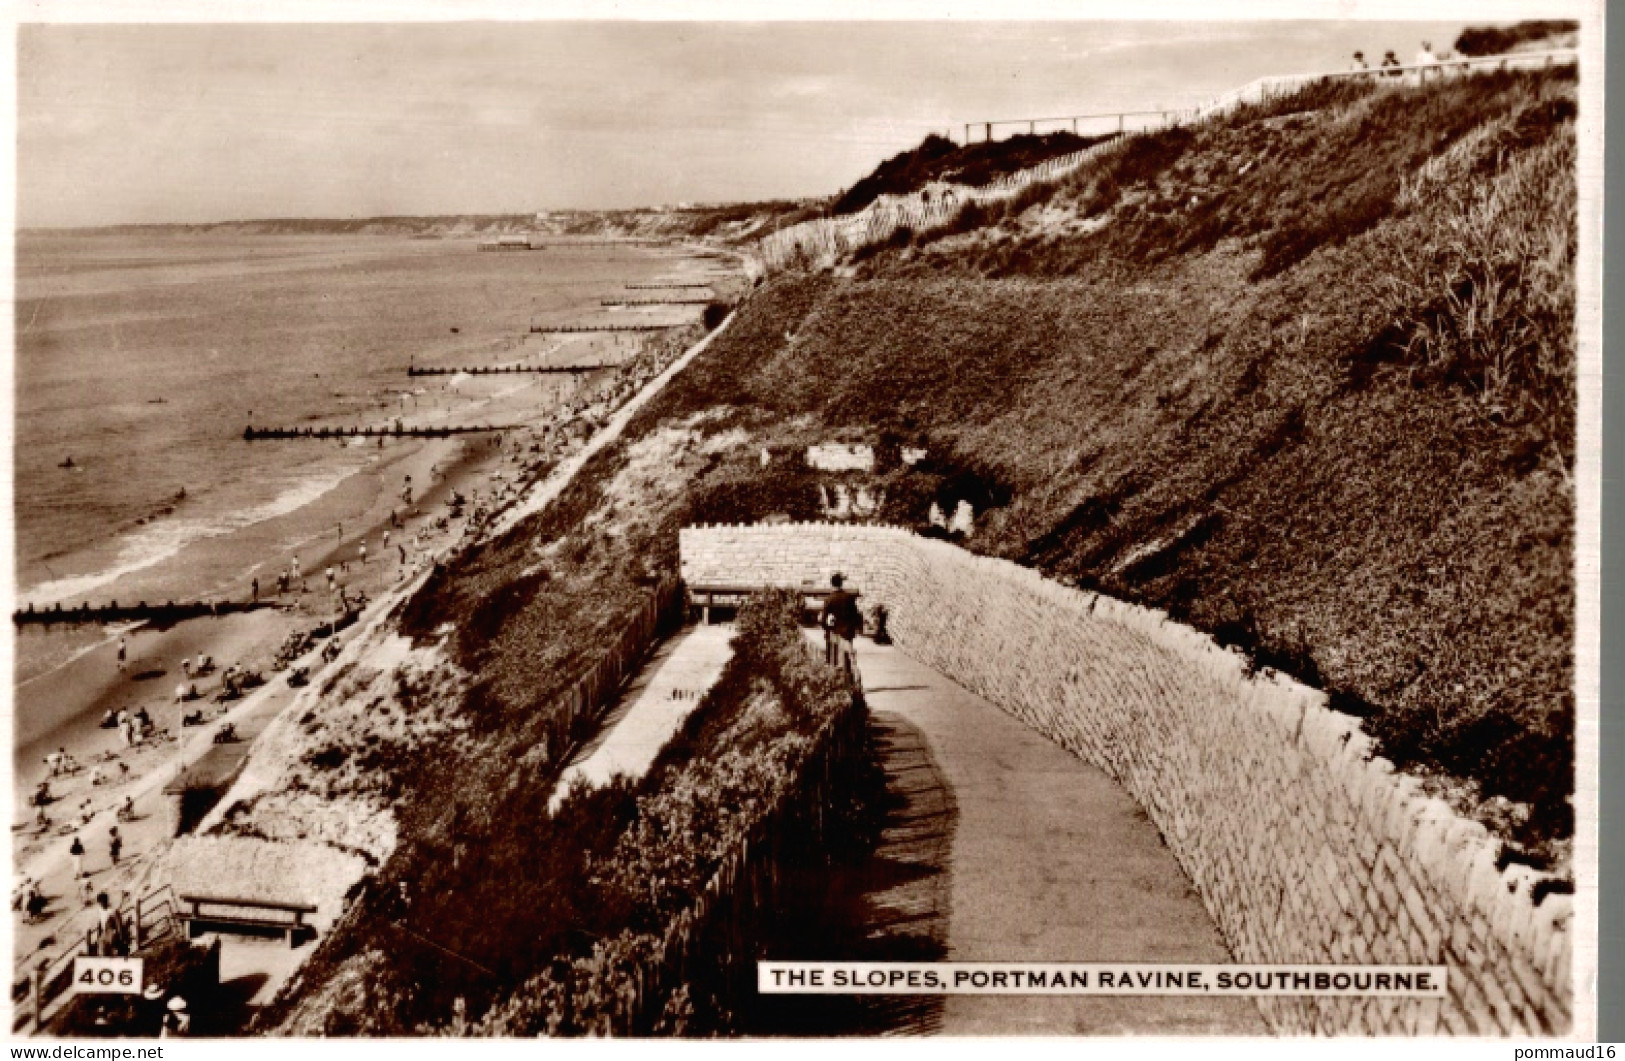 CPSM The Slopes, Portman Ravine Southbourne - Bournemouth (from 1972)